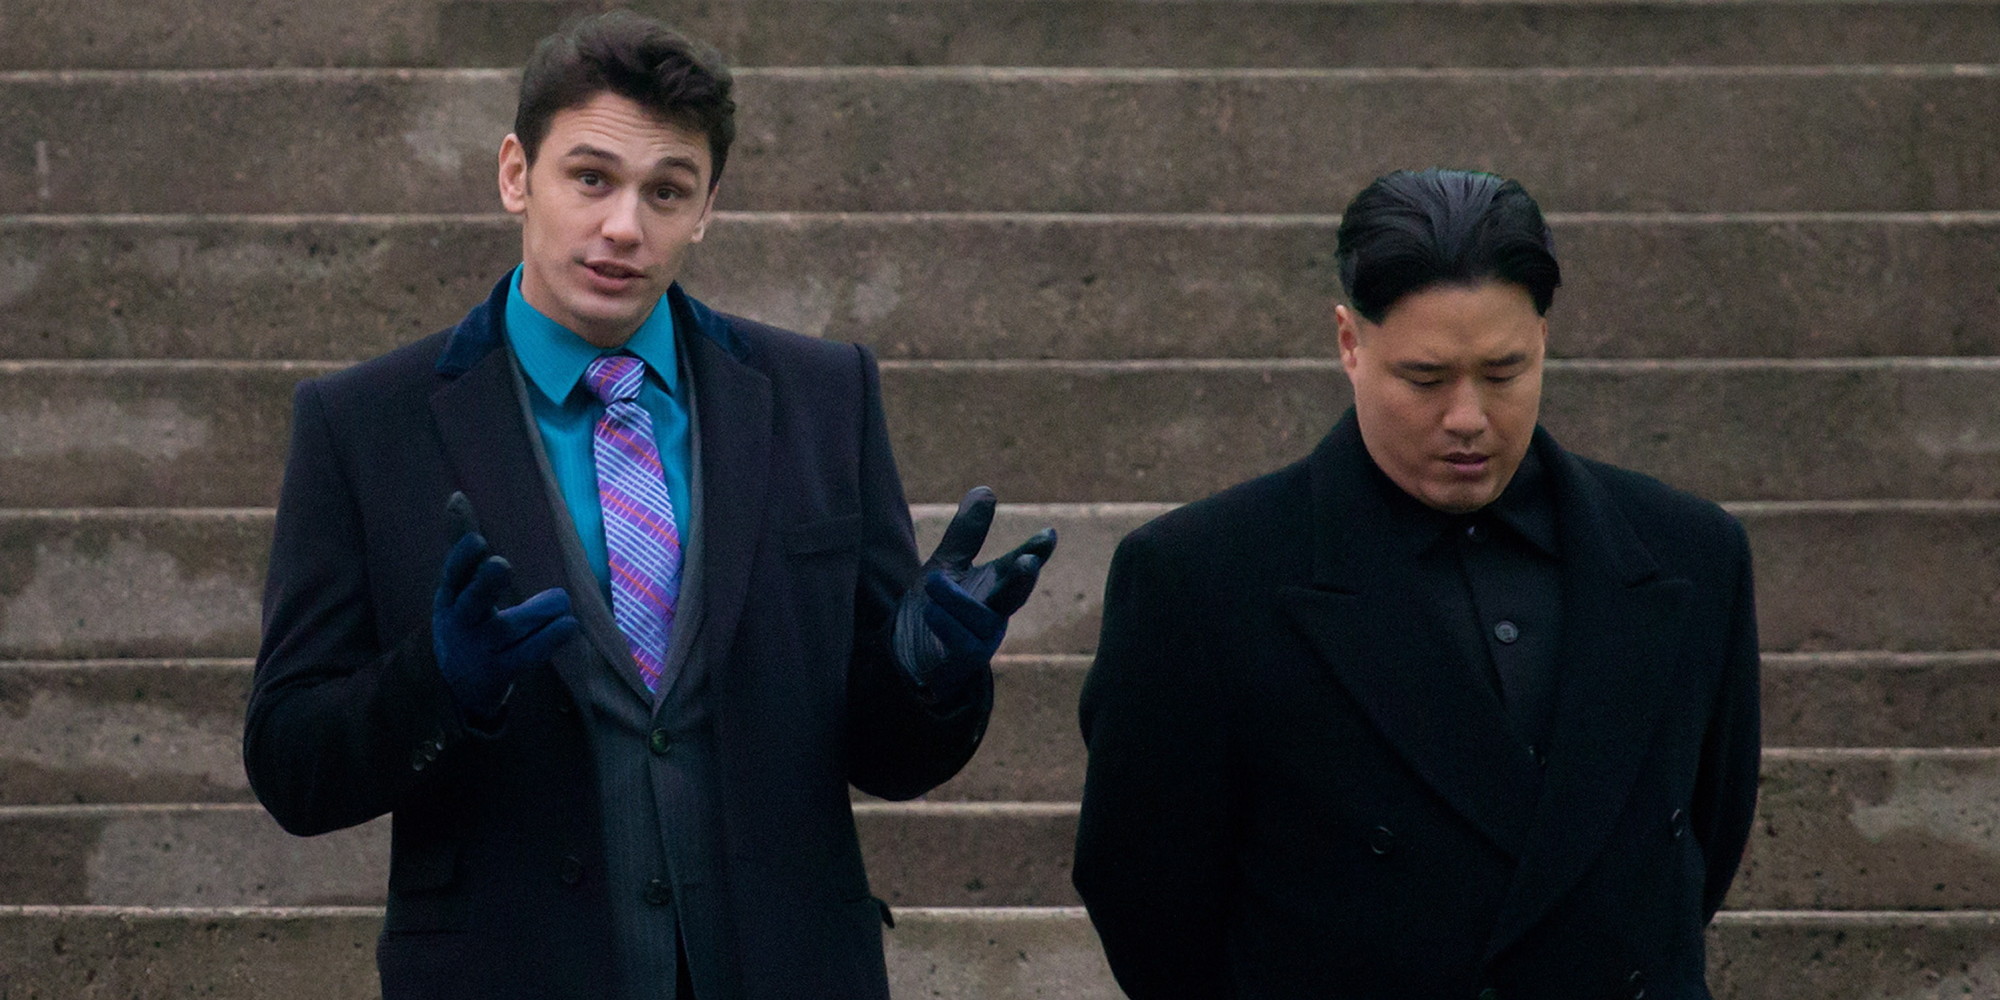 Sony Will Show “The Interview” After Biggest PR Stunt in History, Much Ado About What?